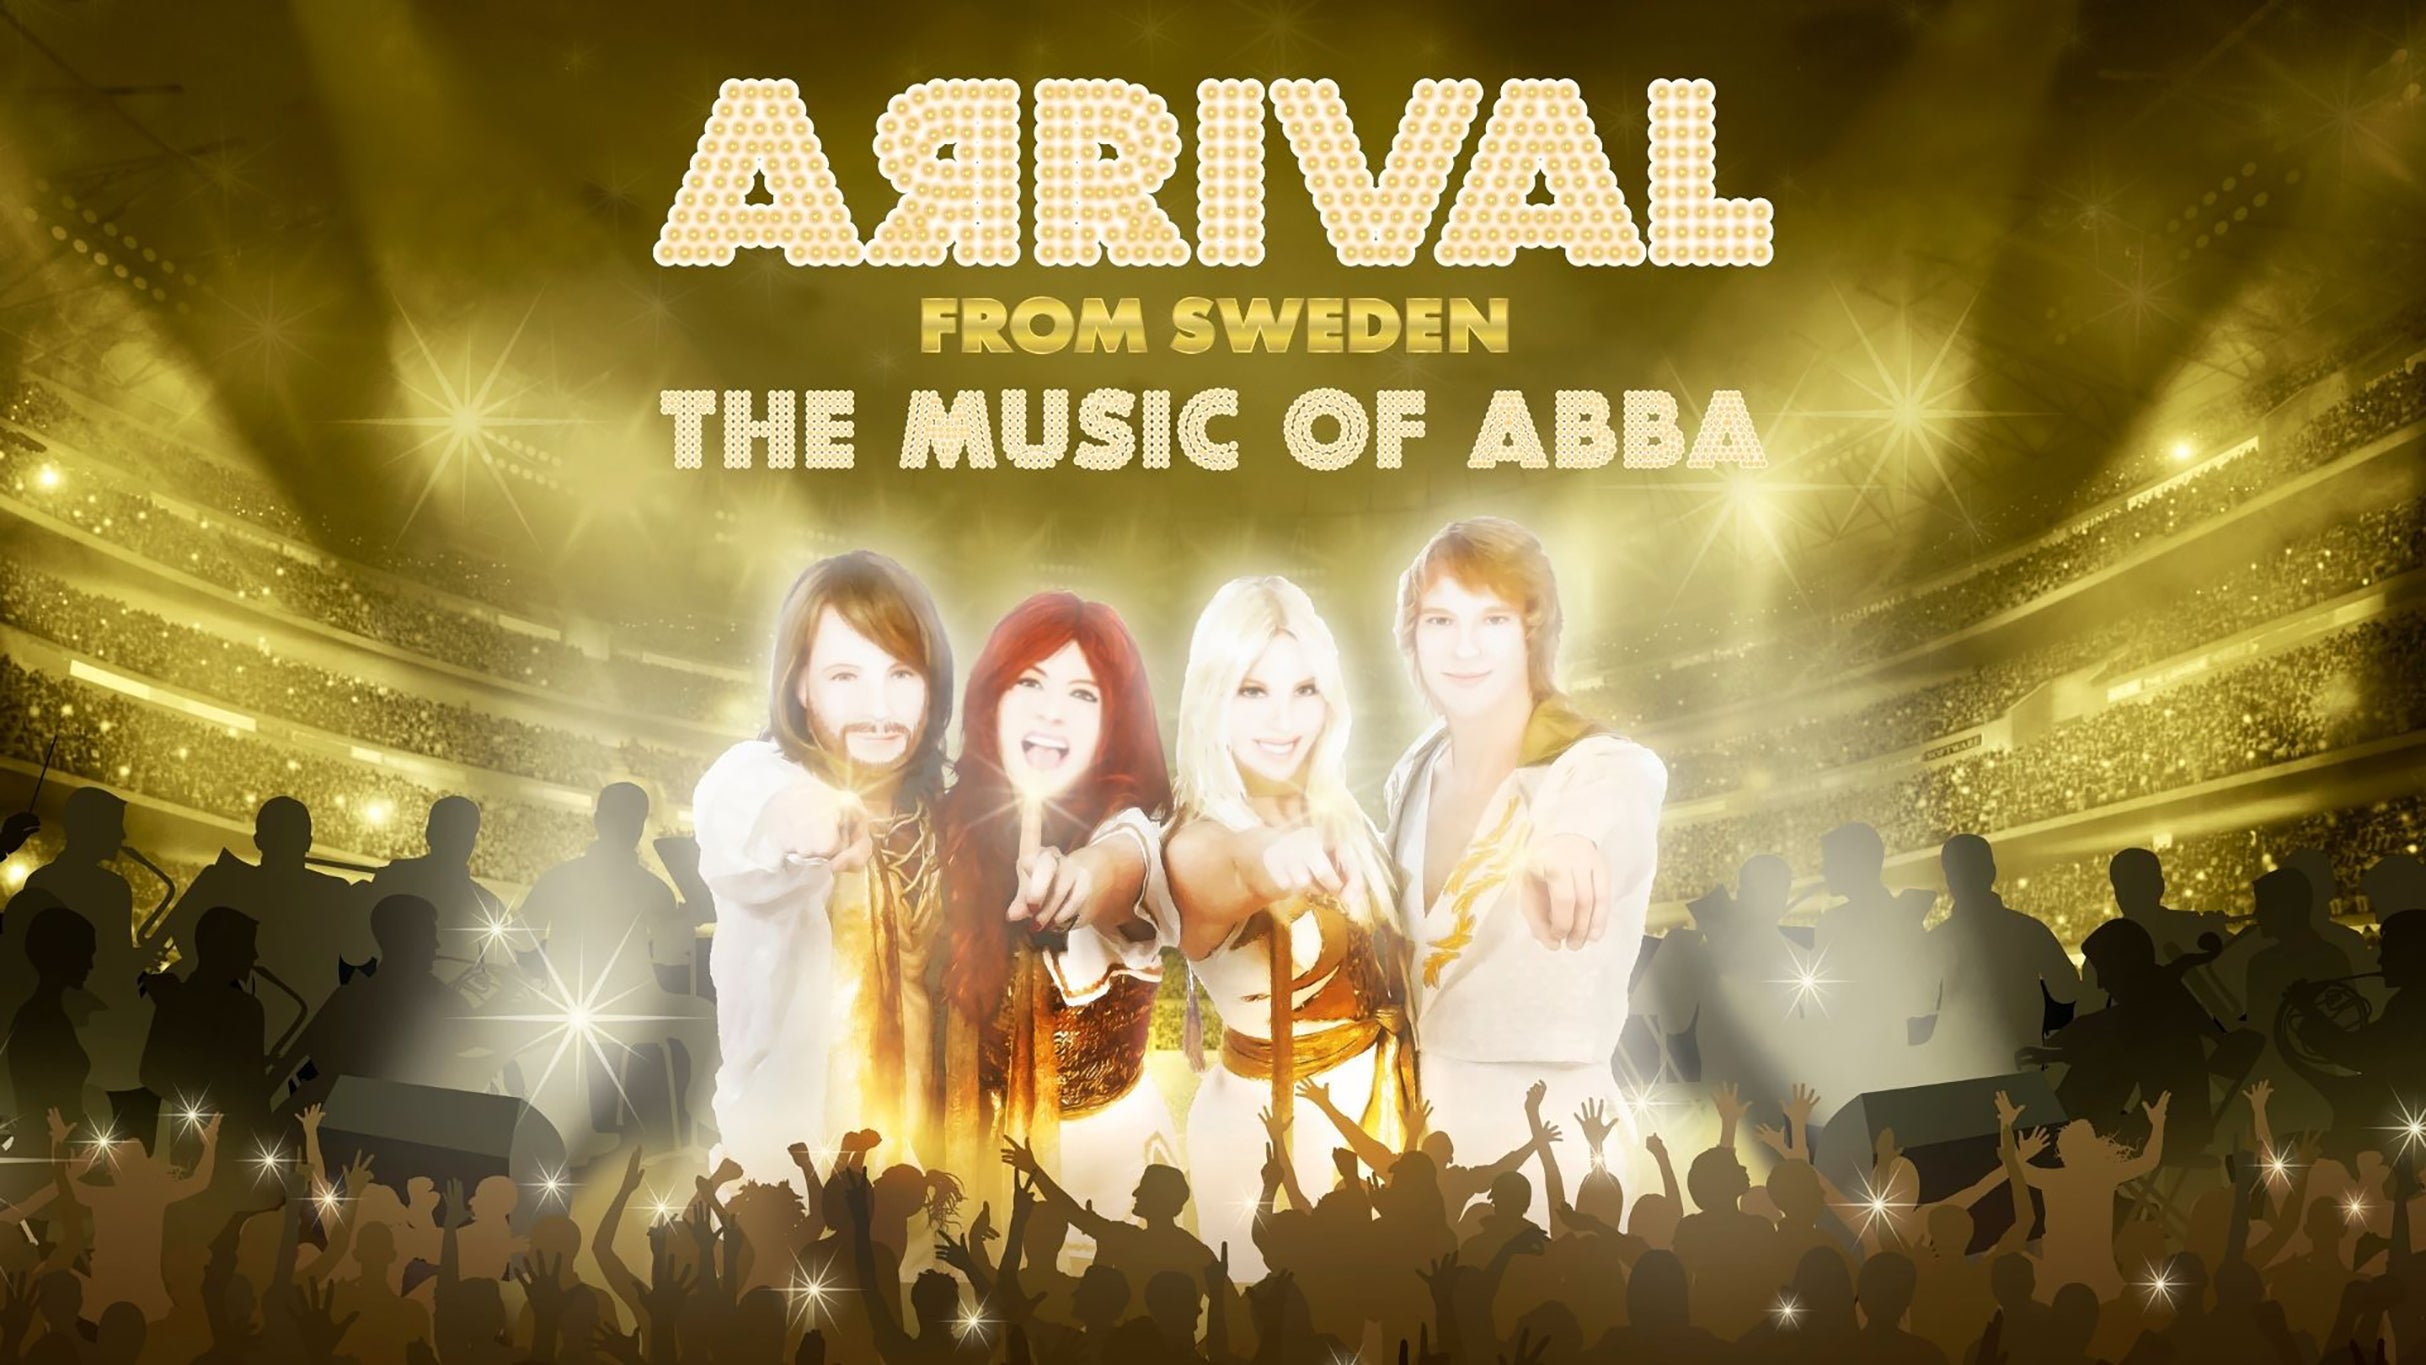 The Music of Abba at Skagit Valley Casino Pacific Showroom